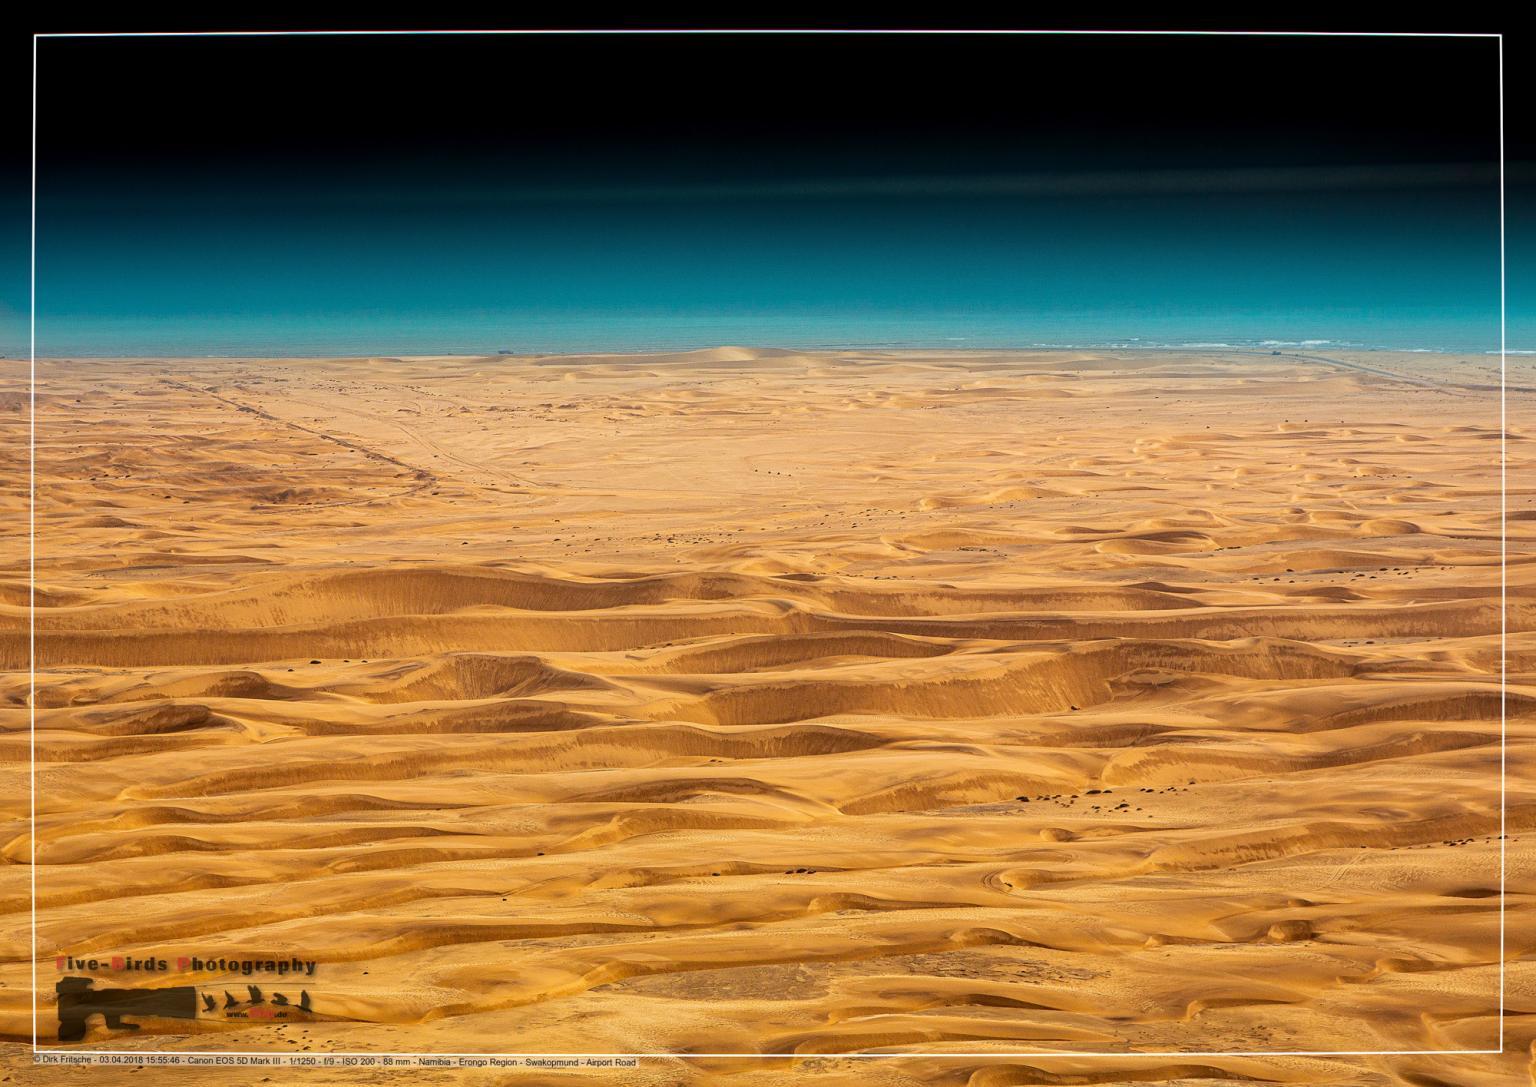 Aerial picture of the landscape of the Namib Desert in western Namibia